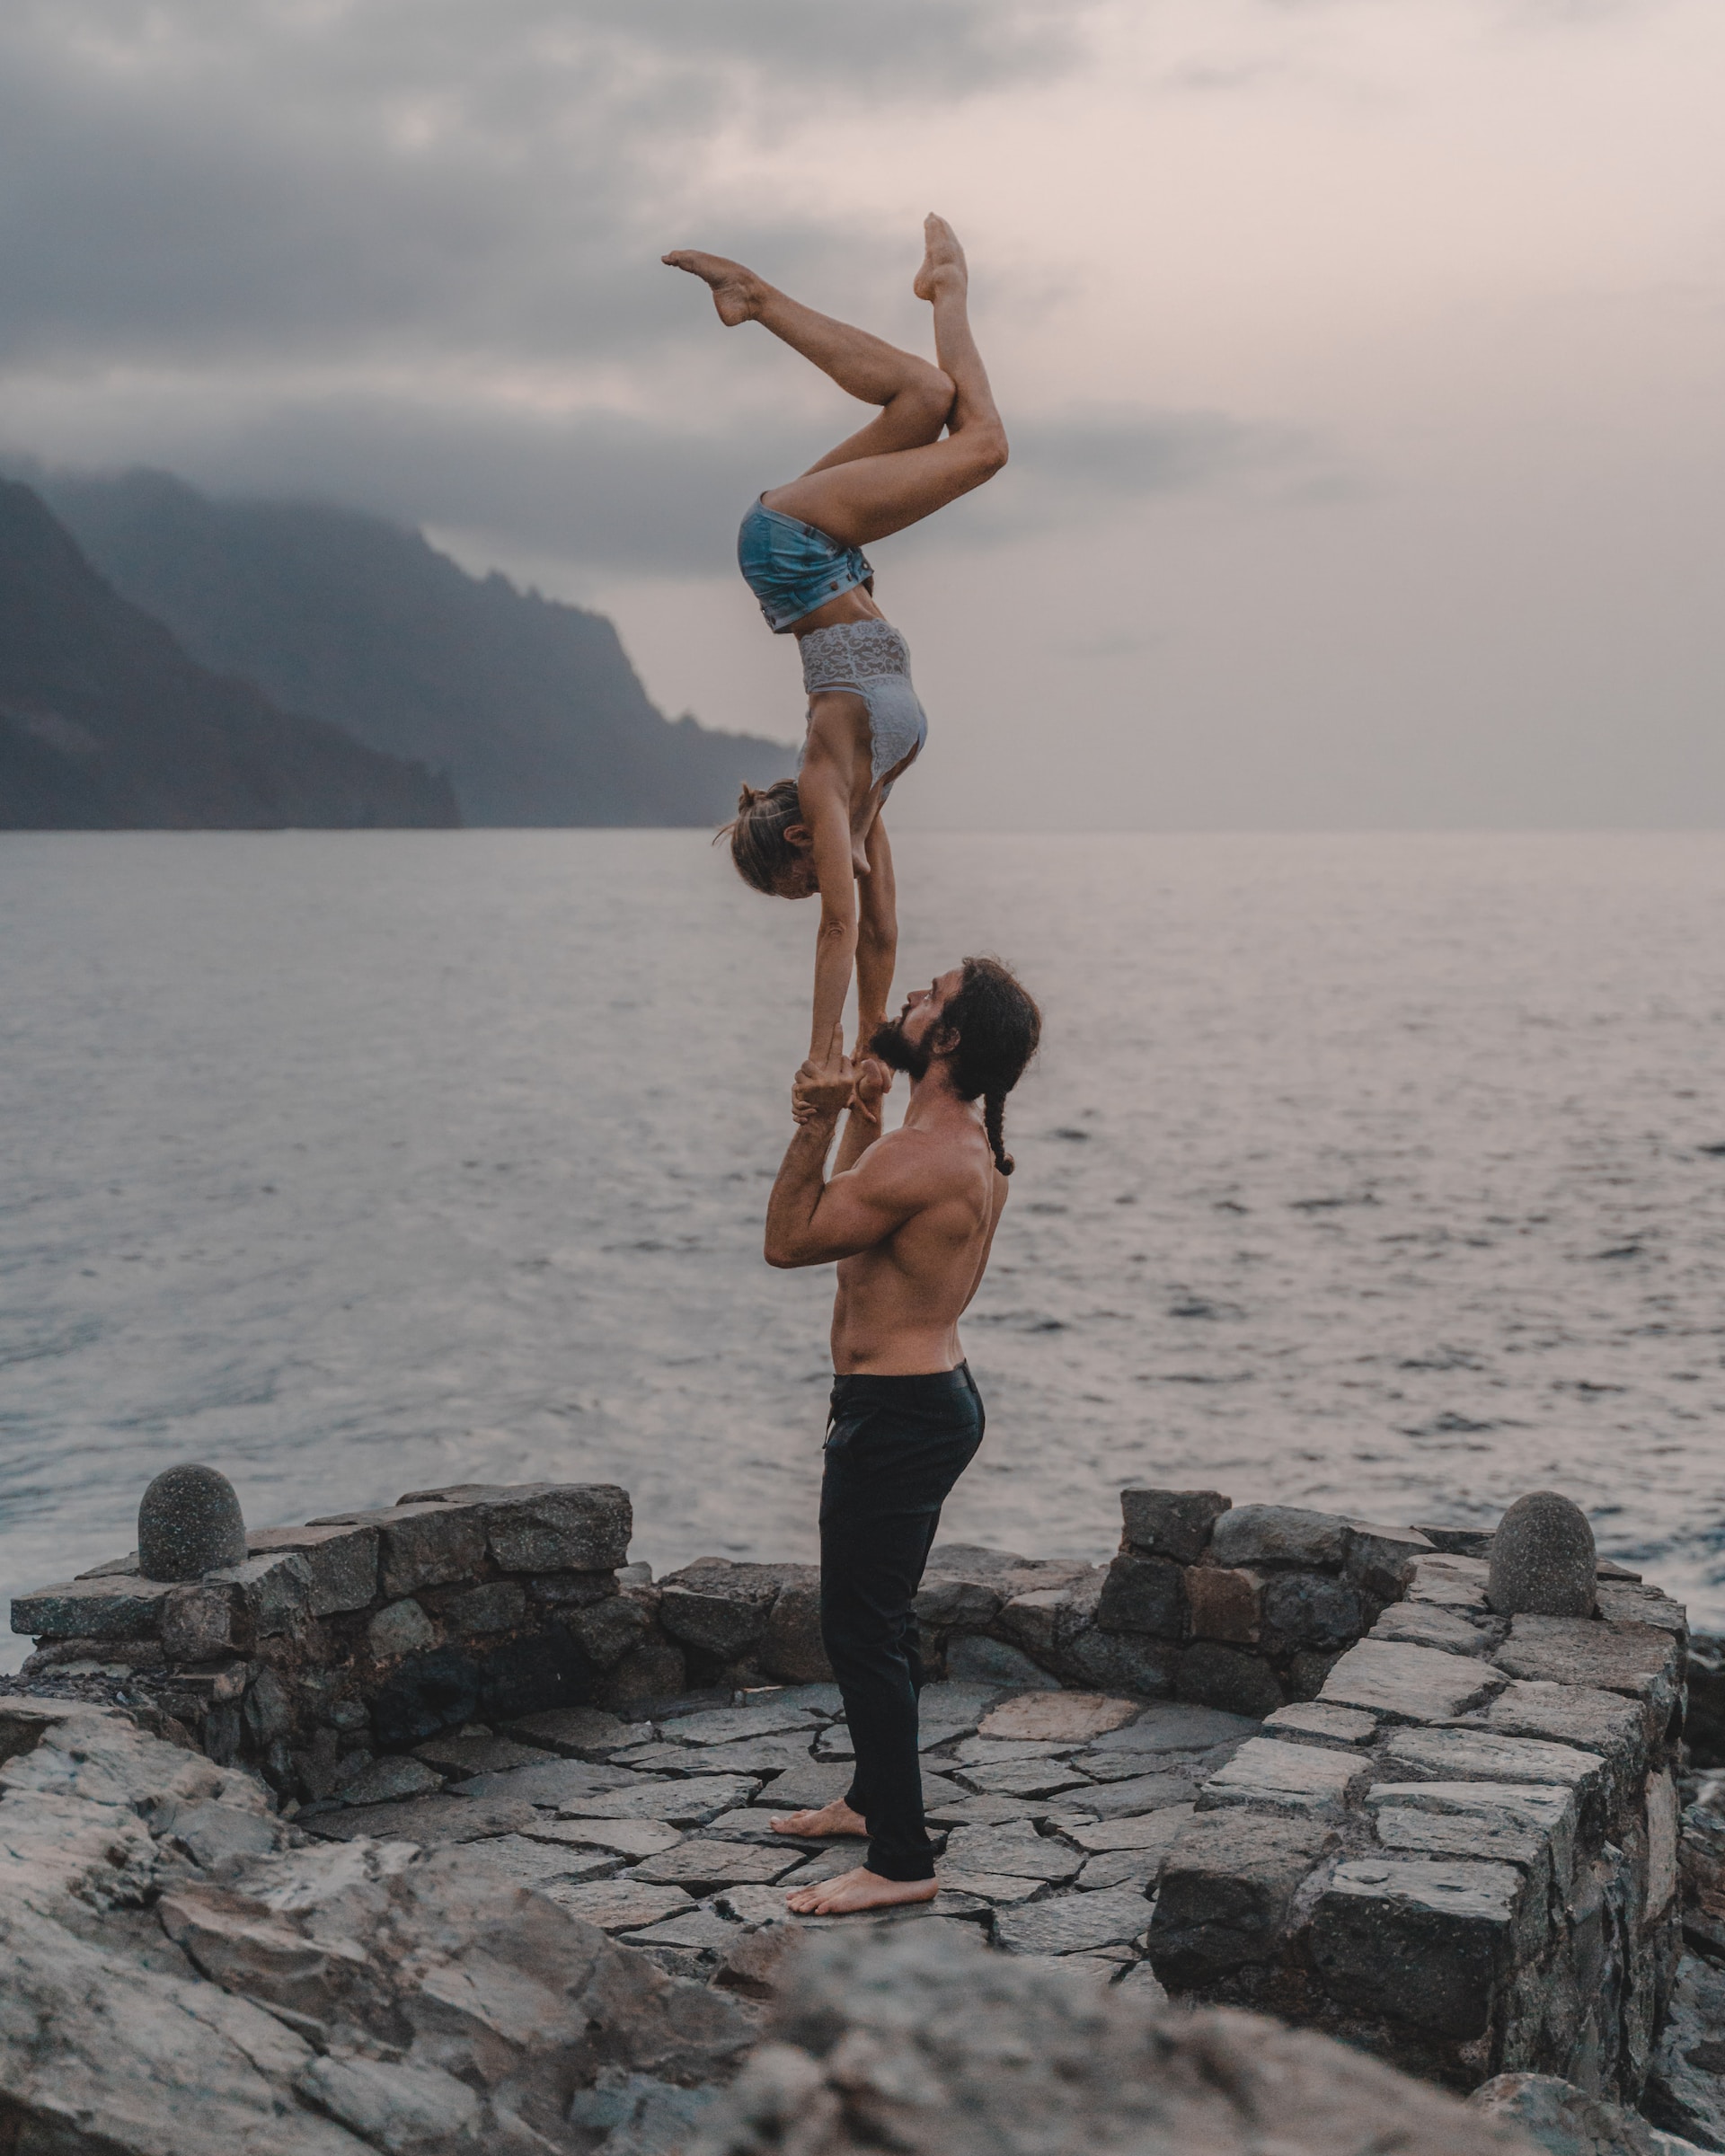 the image shows a female and a male athlete doing gymnastics 